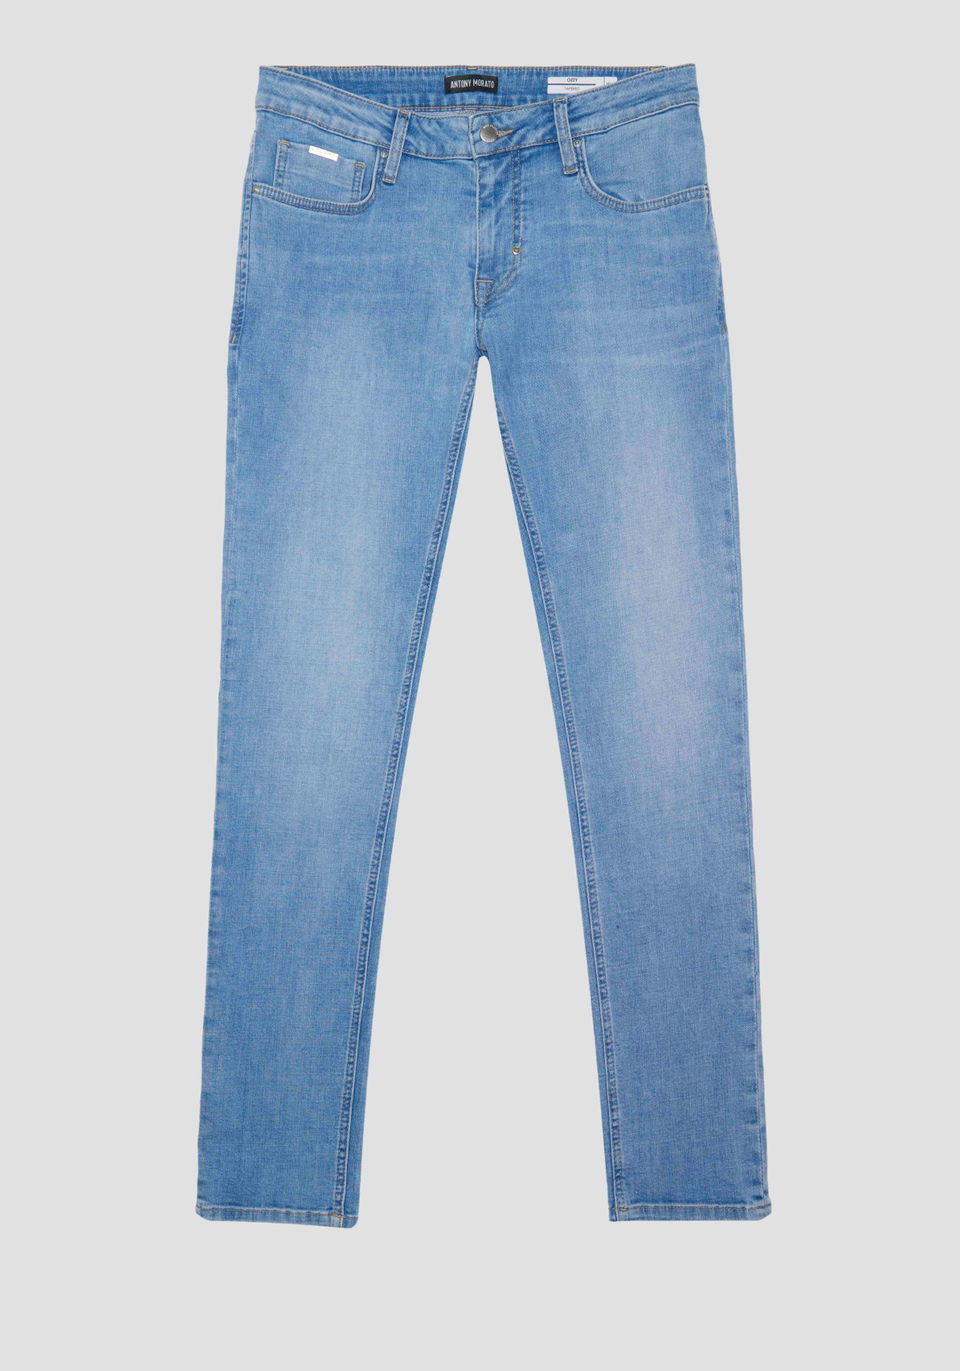 "OZZY" TAPERED FIT JEANS IN ICONIC BASIC BLUE DENIM - Antony Morato Online Shop